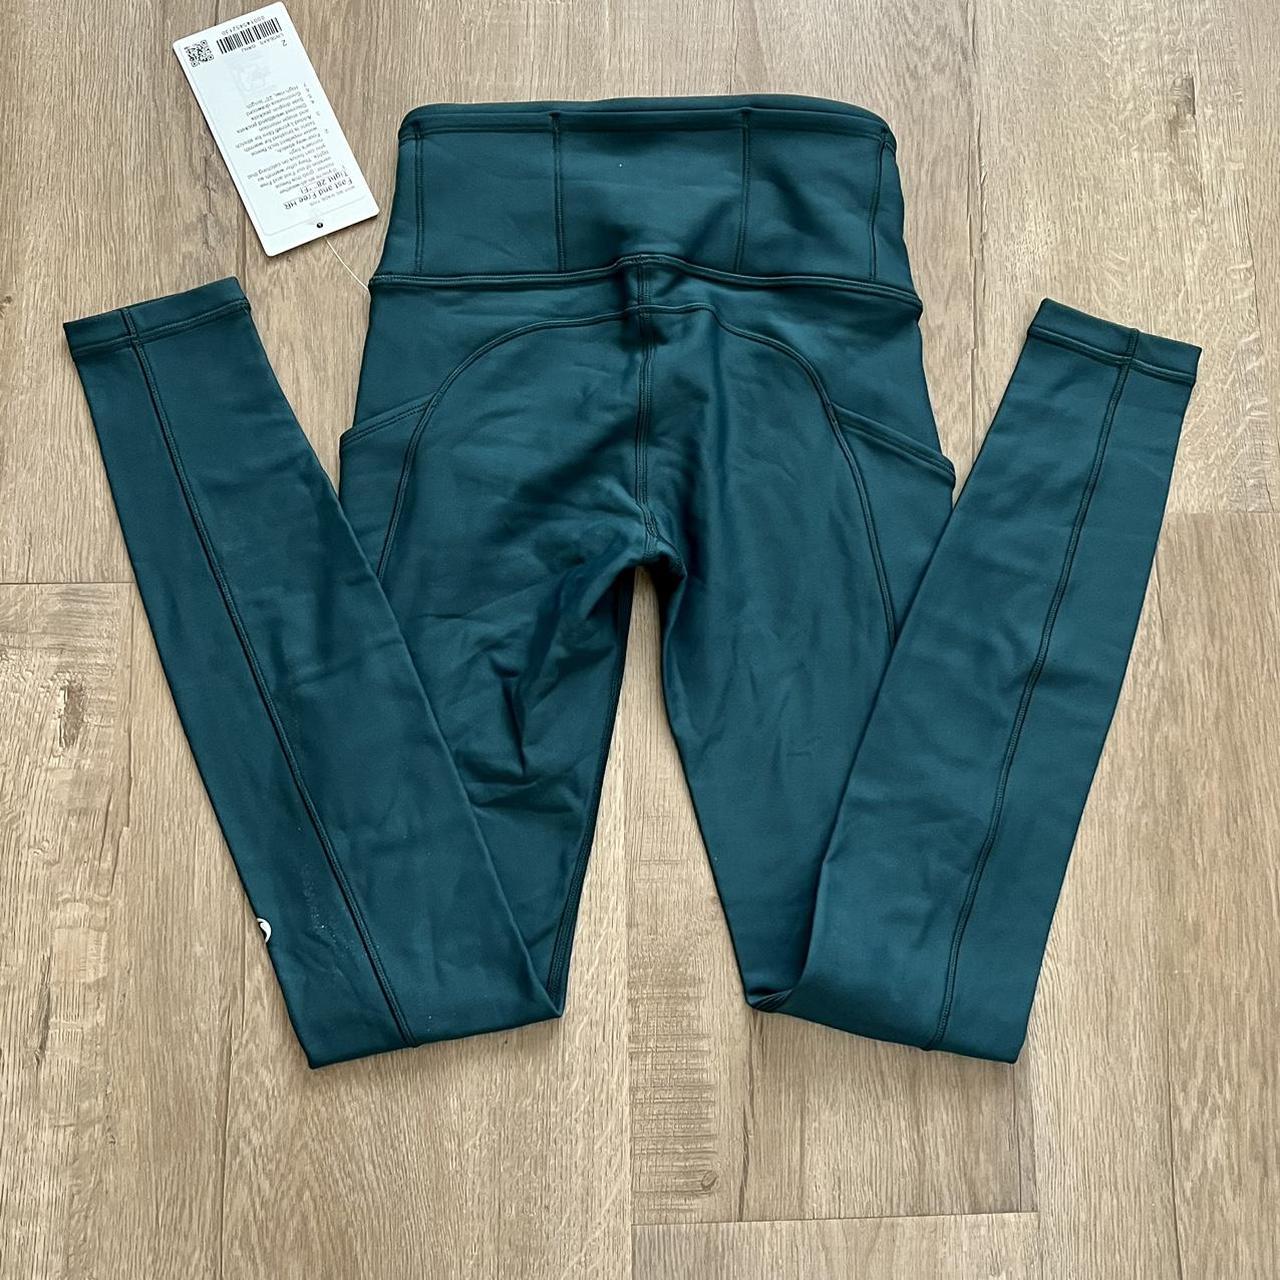 Lululemon Fast and Free High Rise Tight 28 GRNJ - Depop